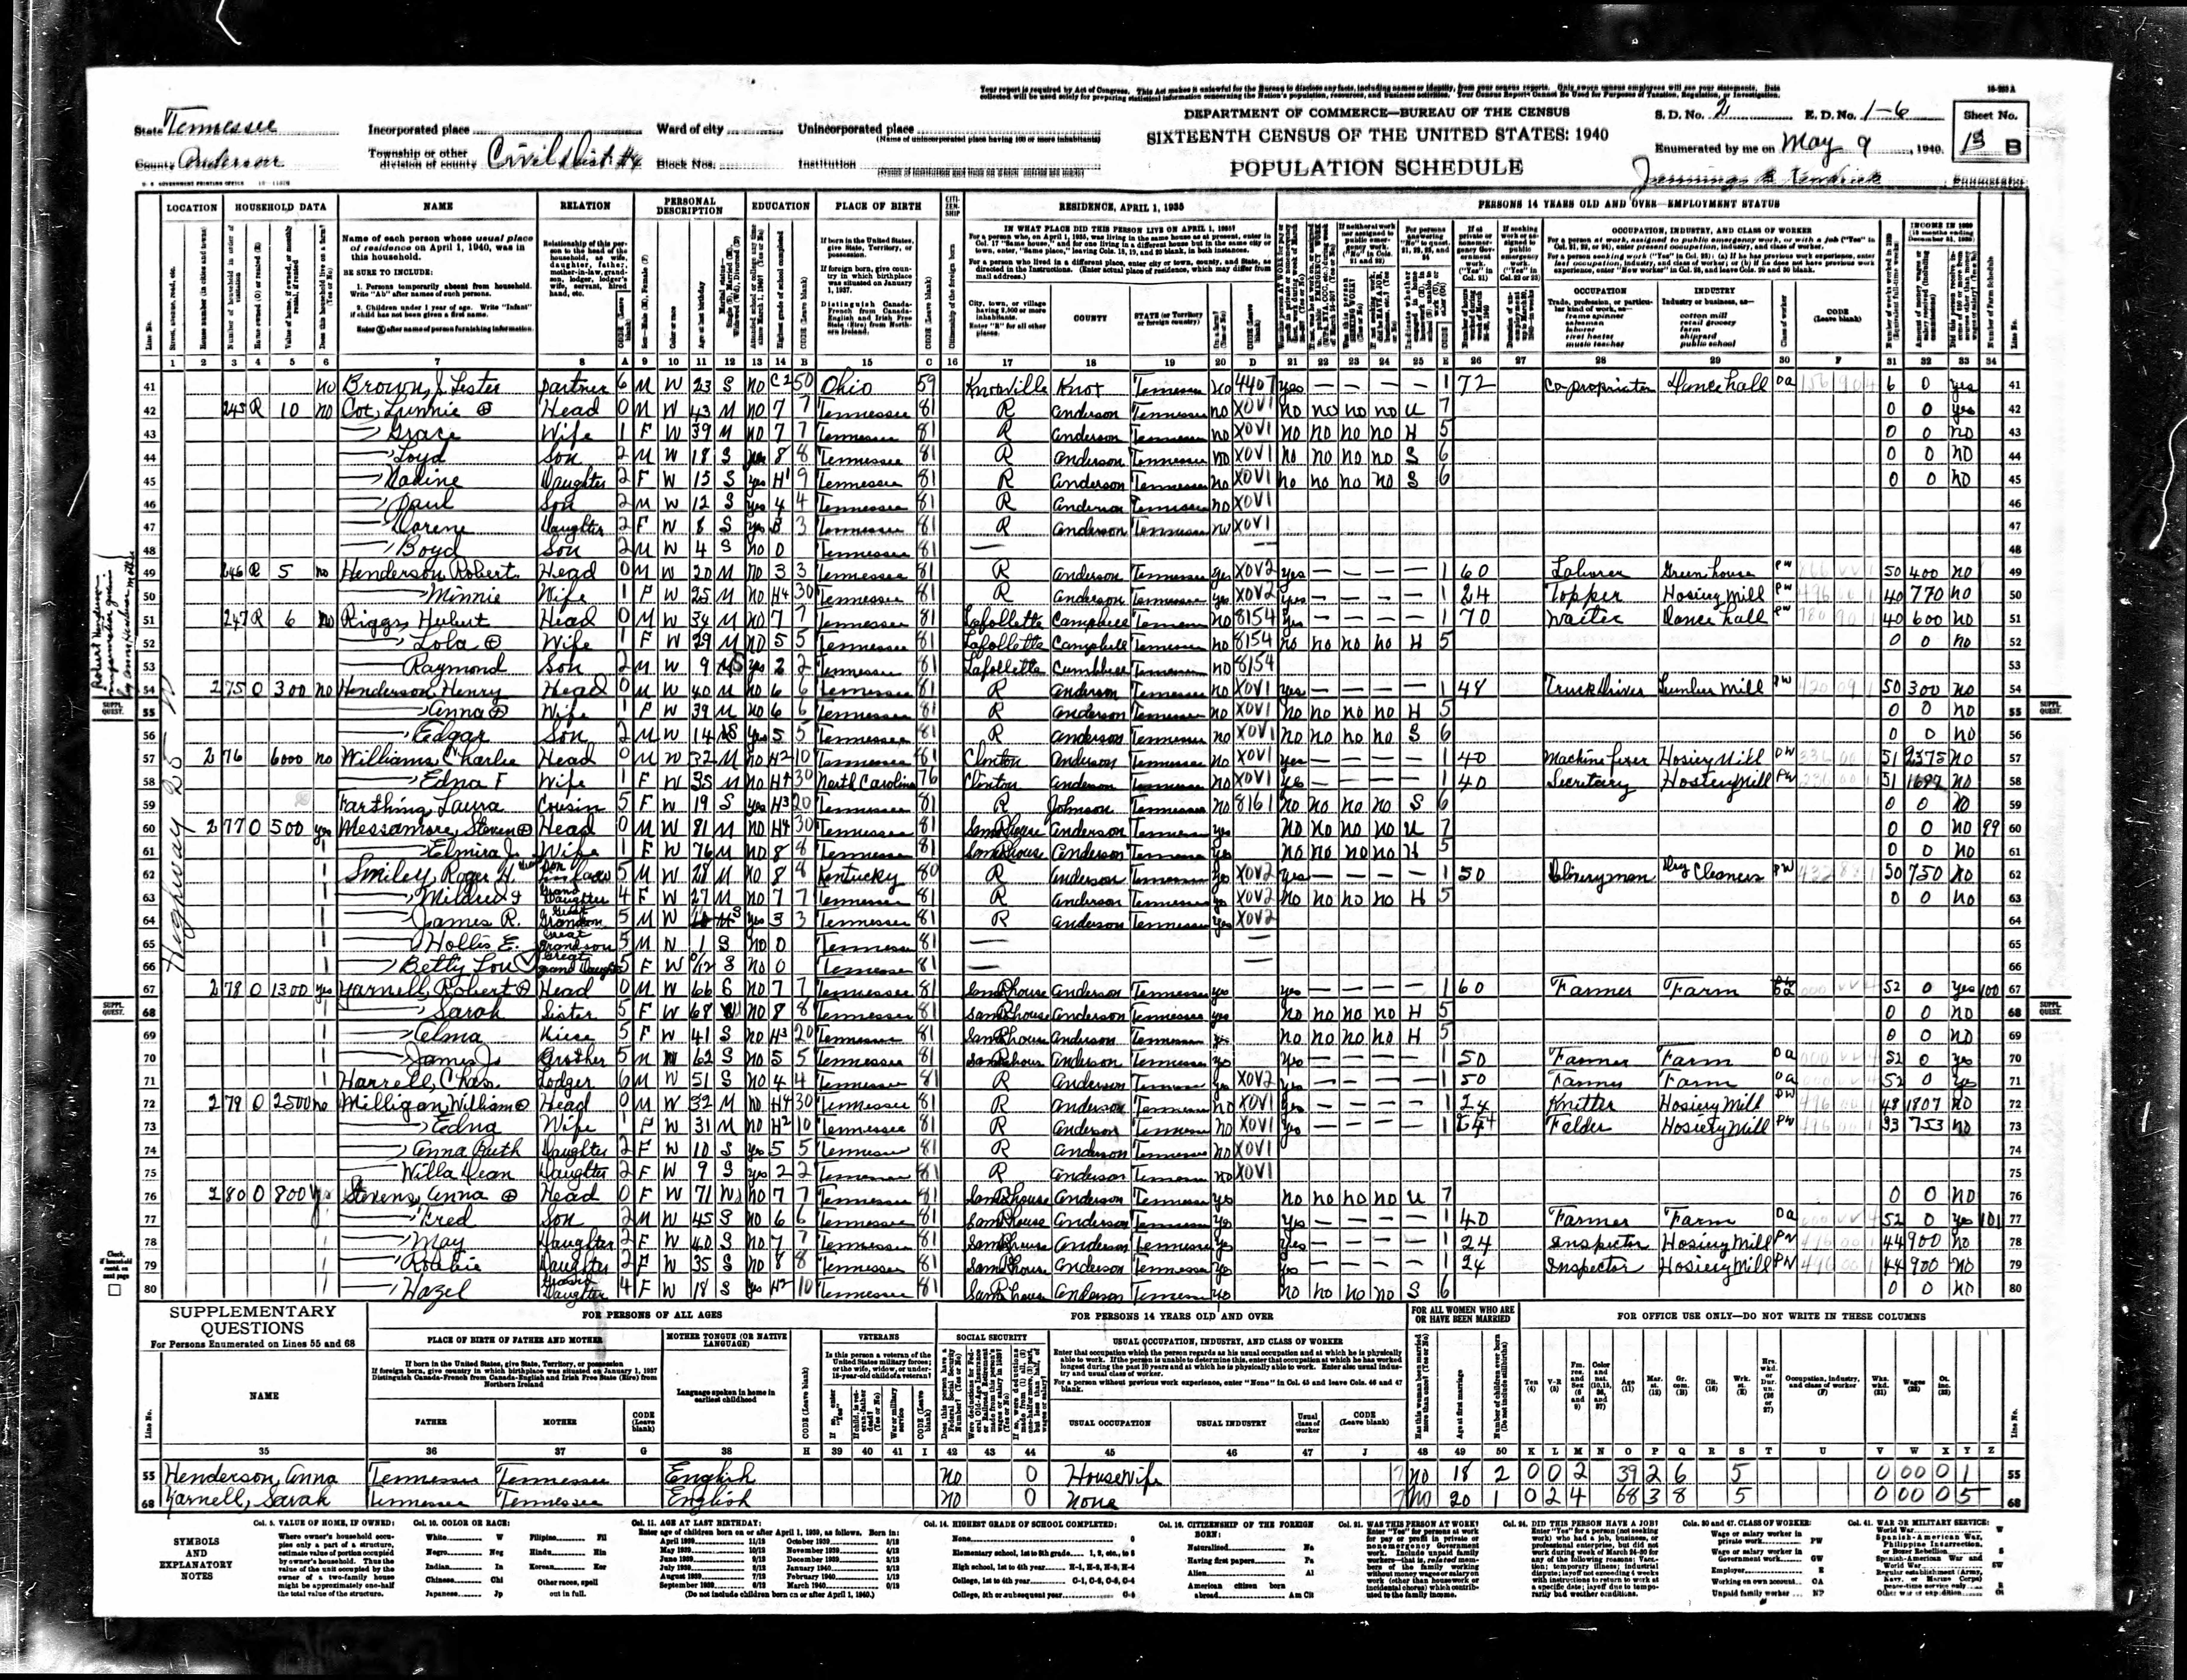 1940 U.S. Census, Anderson County, Tennessee, Dist. 4, page 69b